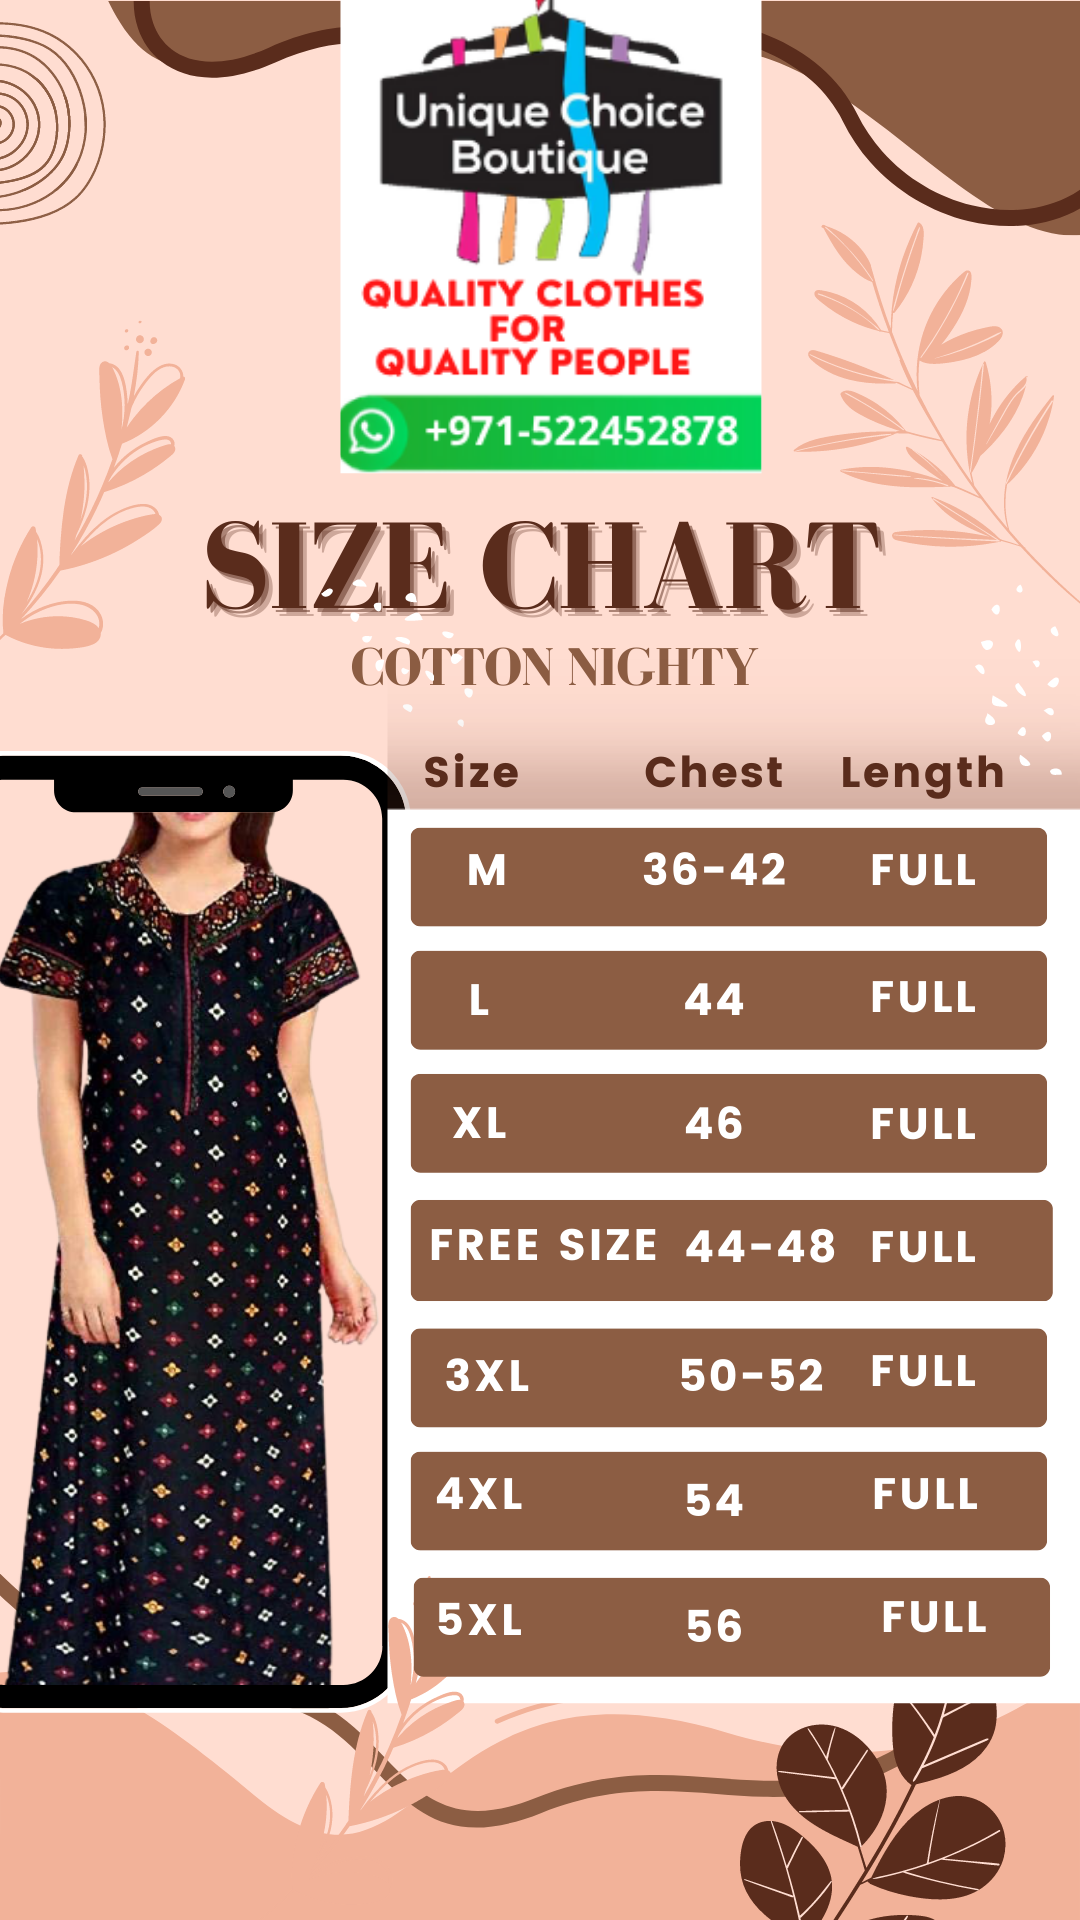 UNIQUE CHOICE Cotton Nighty, Printed Night Gown for women-XL Size- Pink